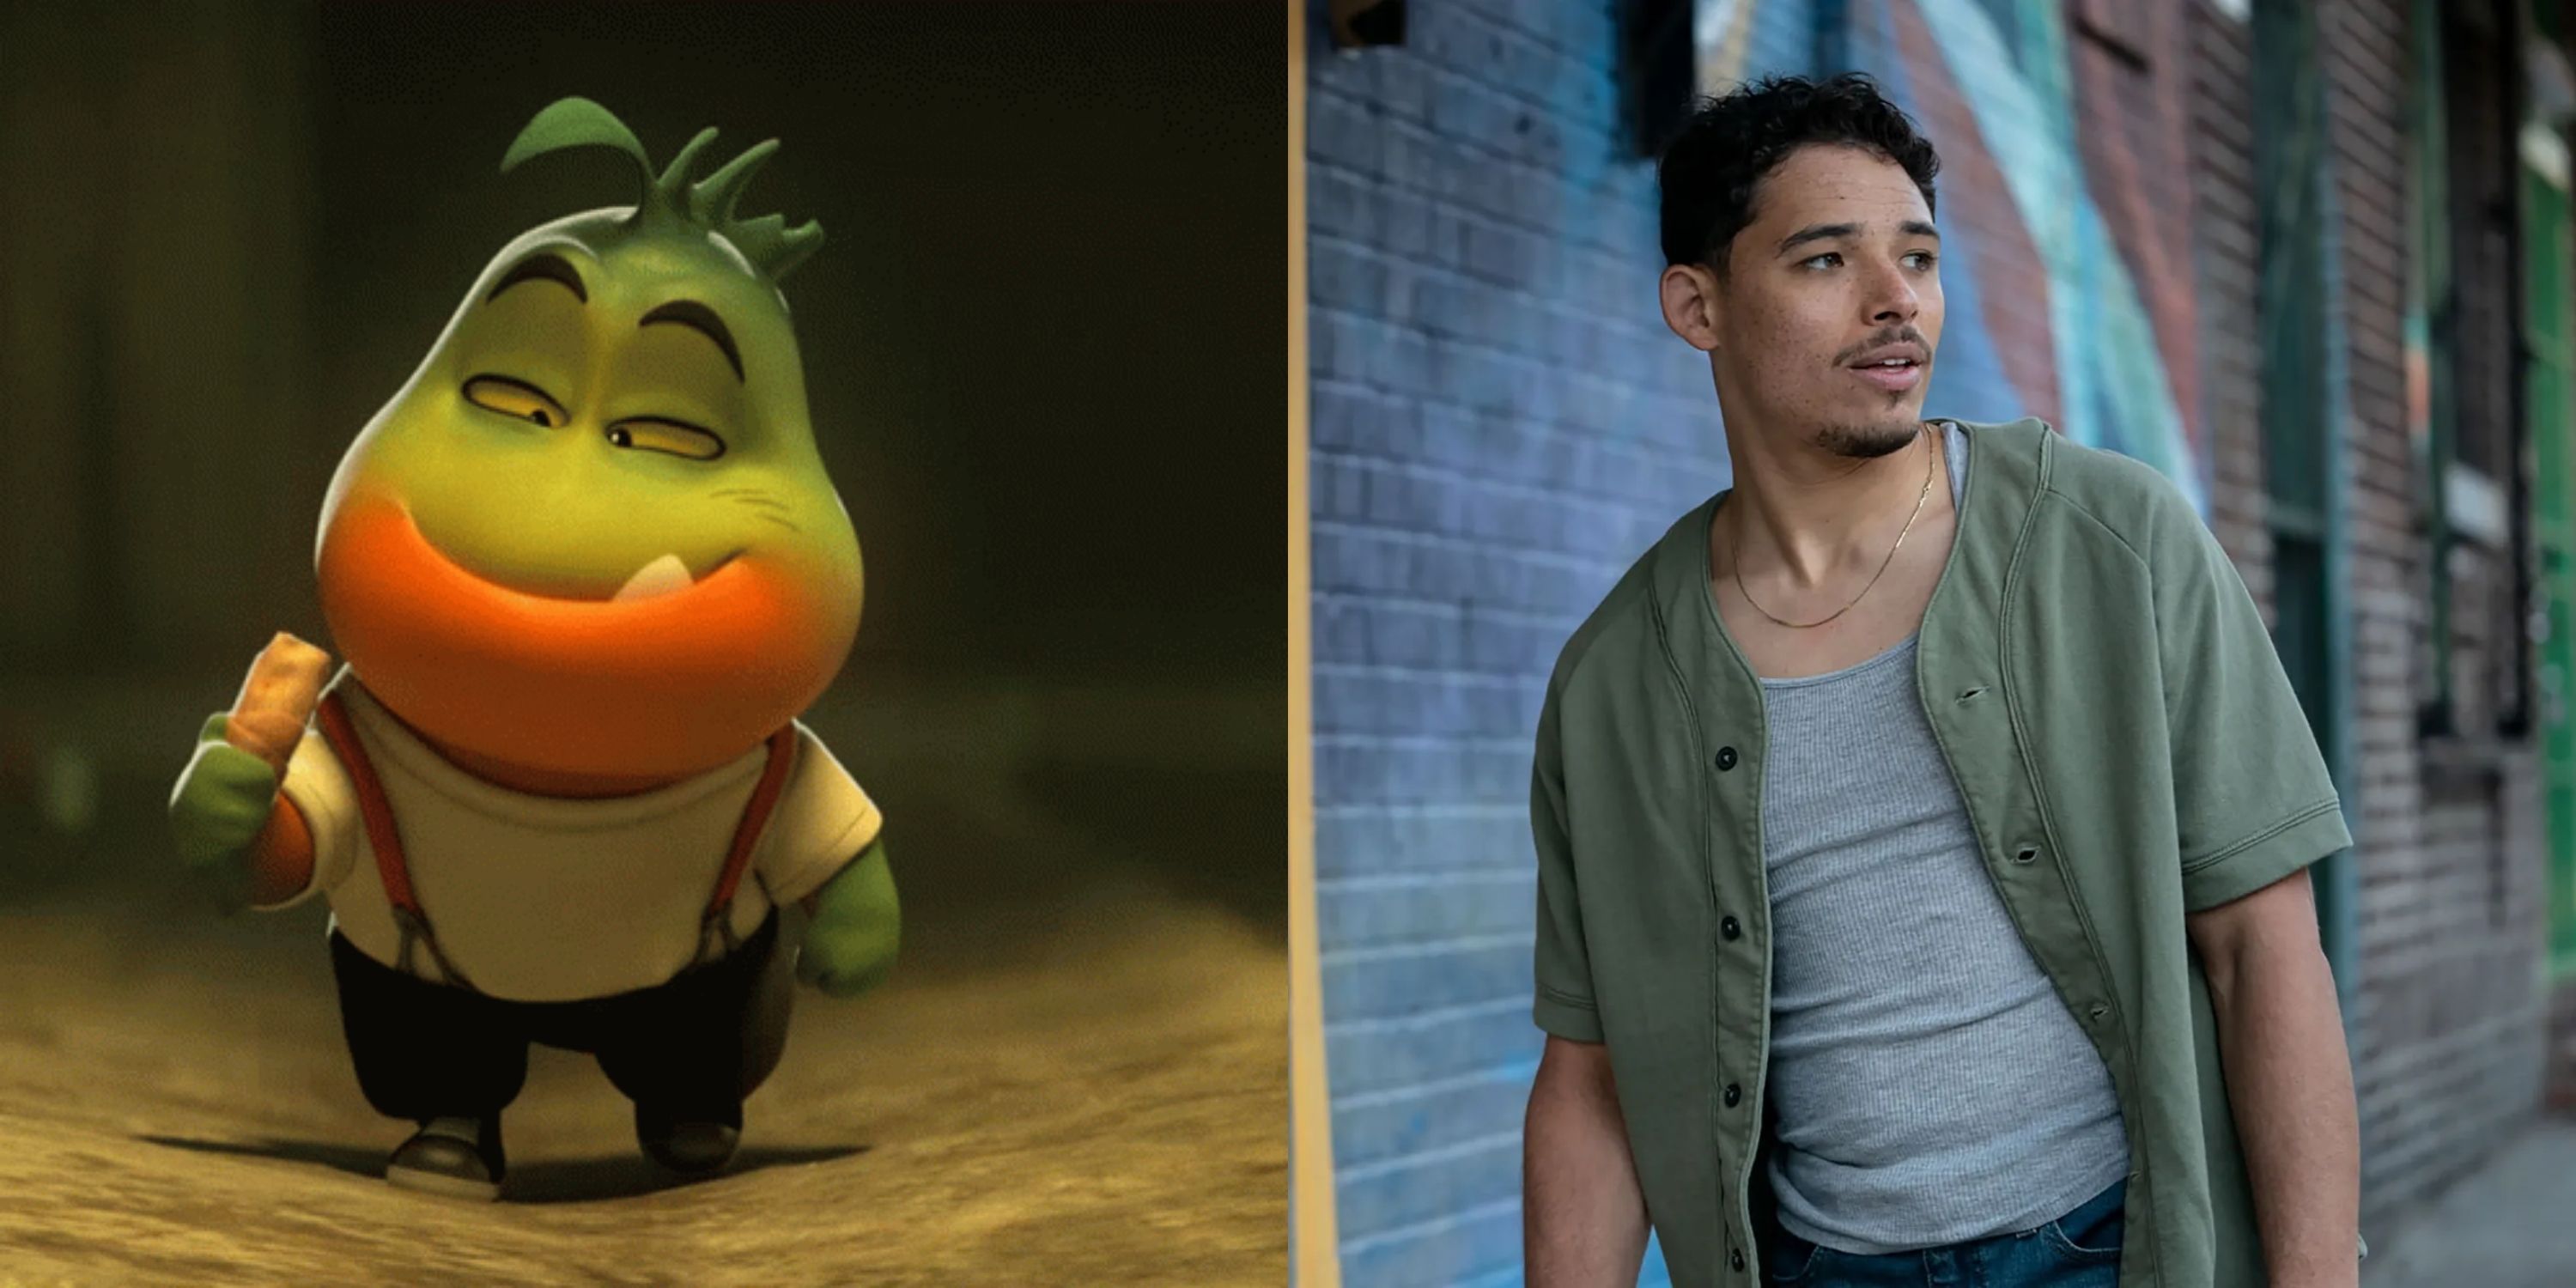 Anthony Ramos as Piranha in The Bad Guys and In The Heights